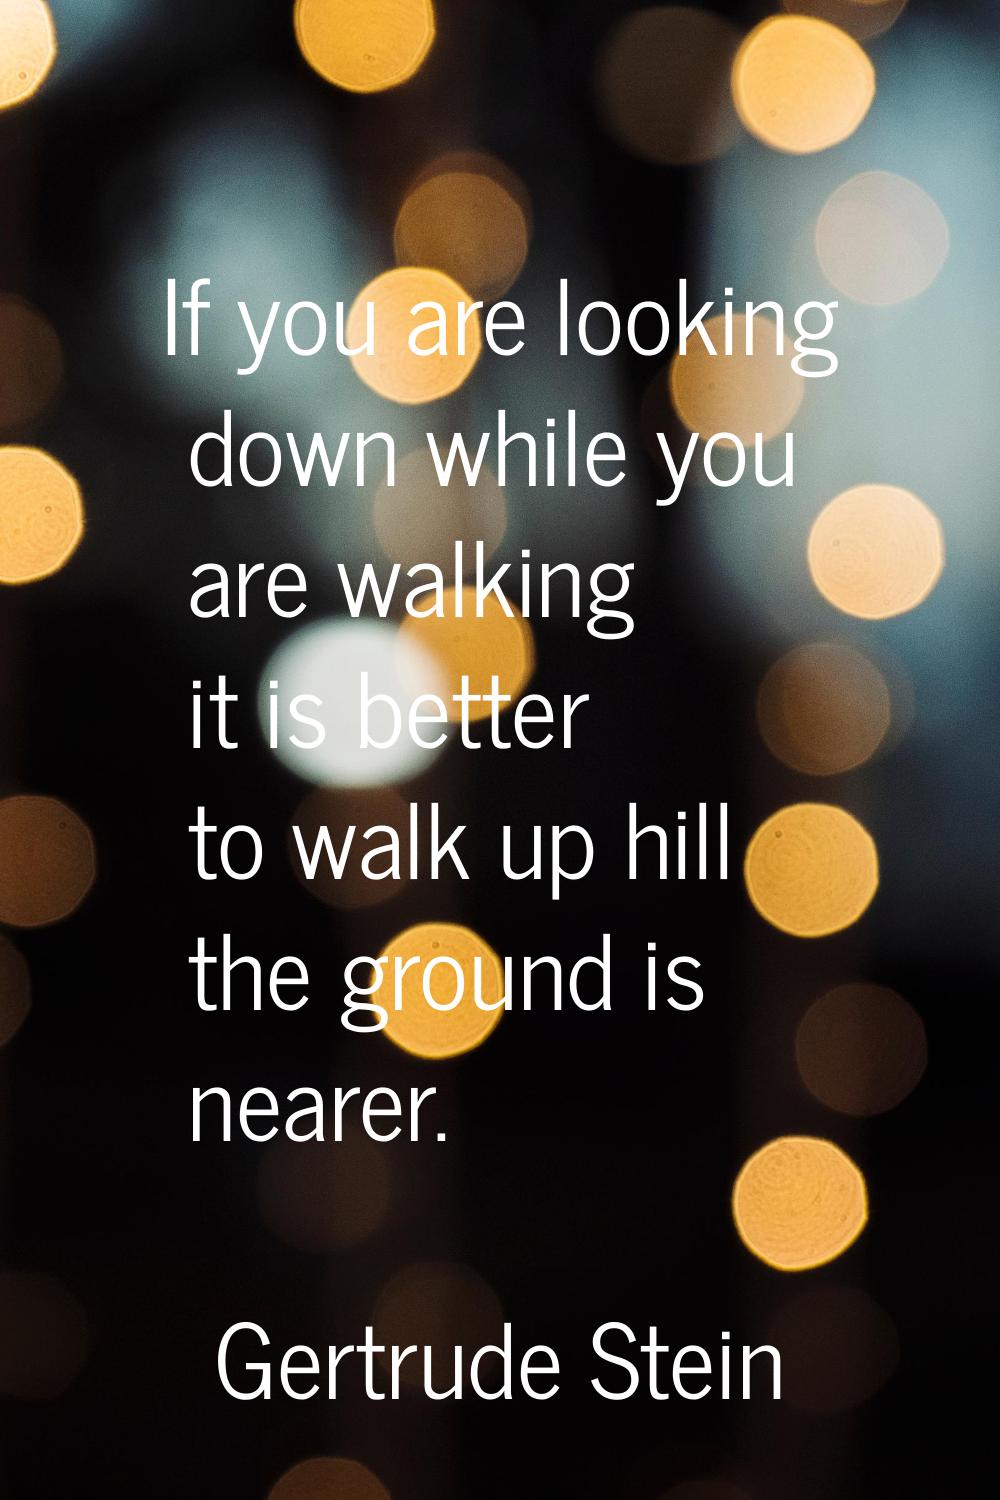 If you are looking down while you are walking it is better to walk up hill the ground is nearer.